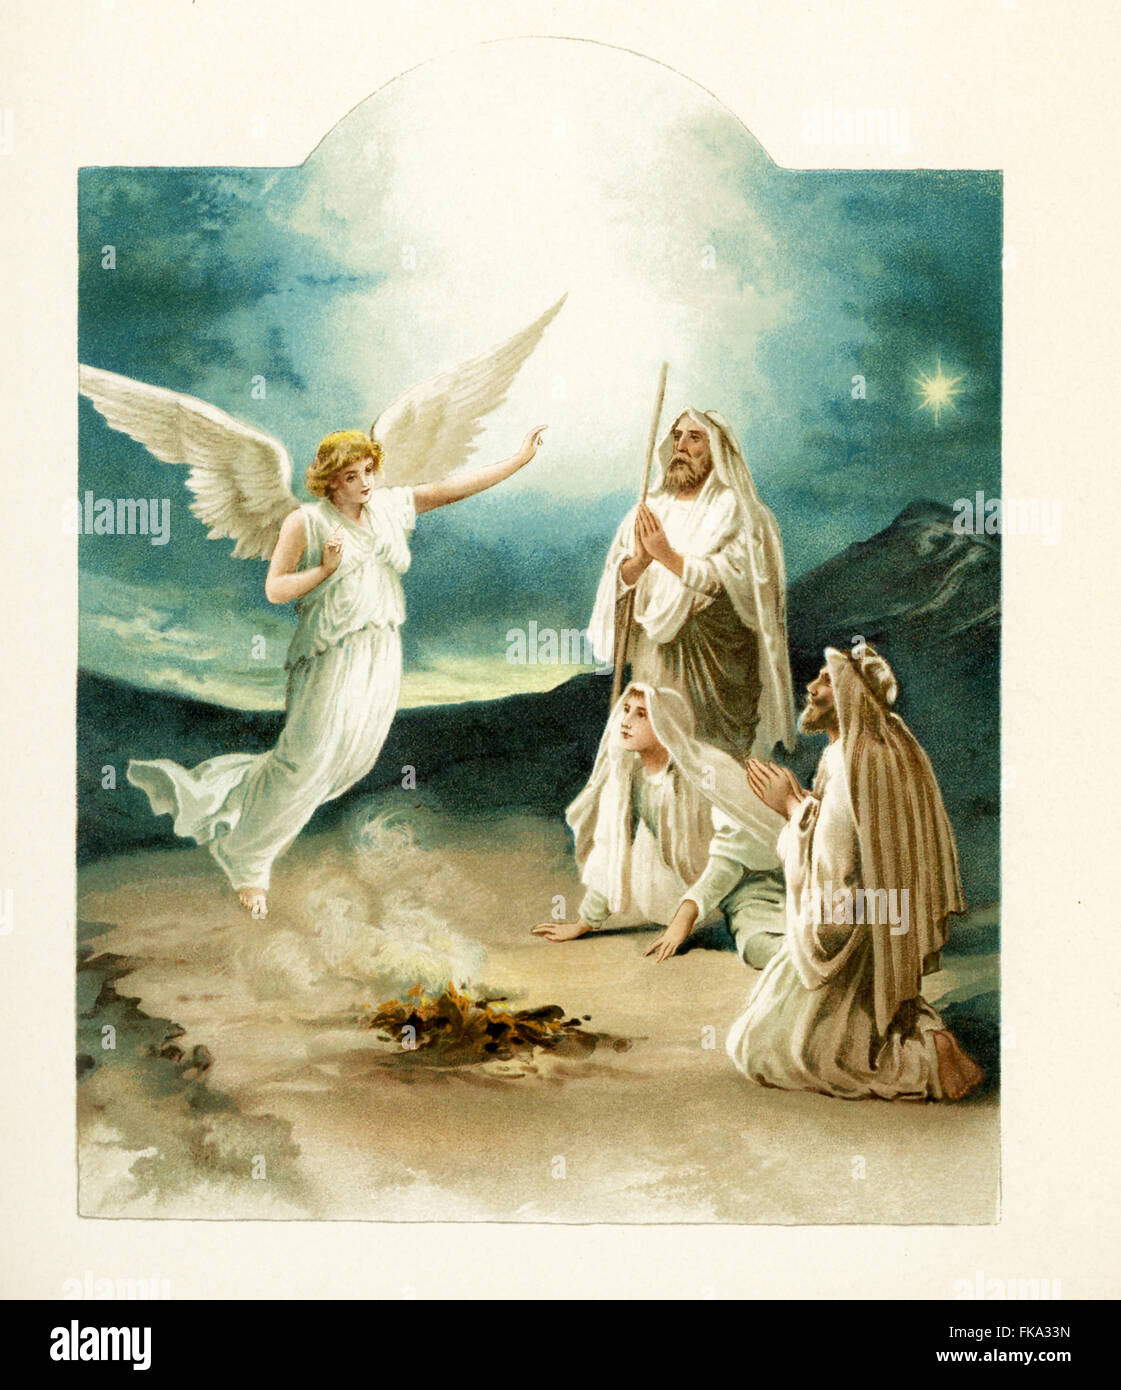 The caption for this illustration reads: 'And these were in the same country shepherds abiding in the field, keeping watch over their flock by night.' The Christian religion celebrates the birth of Jesus Christ, the central figure of the religion, on December 25. The birth is often referred to as 'the Nativity' and the three main figures are Jesus, his mother Mary, and Mary's husband Joseph. In this 19th century depiction, an angel is shown telling shepherds to honor Jesus, who is lying in a manger.  The shepherds are shown with their sheep  and the star of Bethlehem lighting  up the sky. Stock Photo